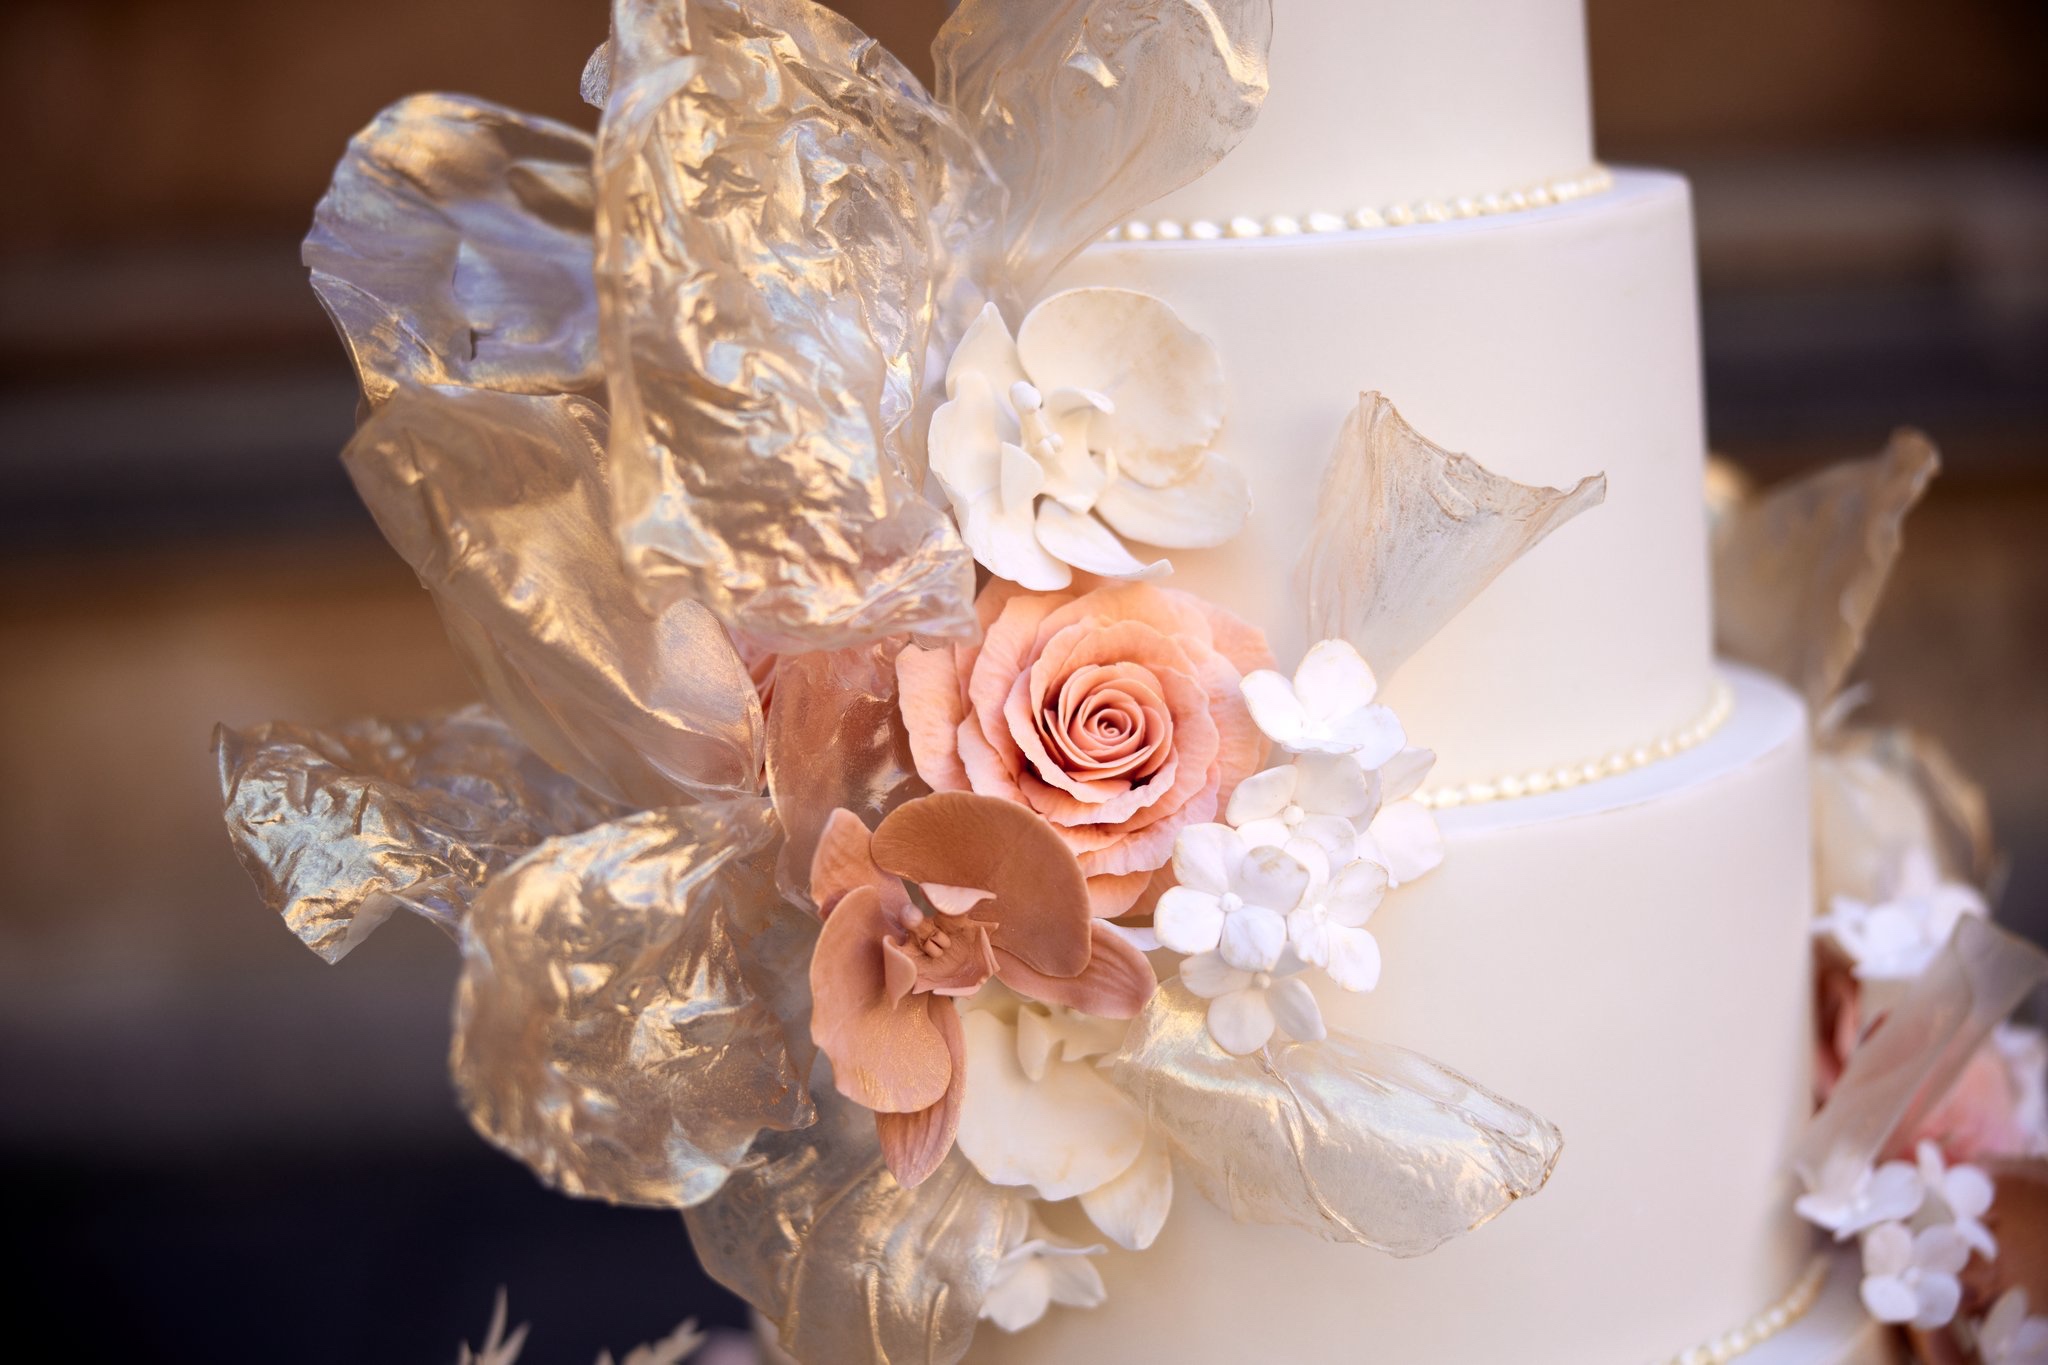 Details of By Yevnig 5 tier contemporary ivory rice paper bohemian wedding cake at a Maple Rose designed wedding, Bodleian Library, Oxfordshire captured by Zaki Charles Photography